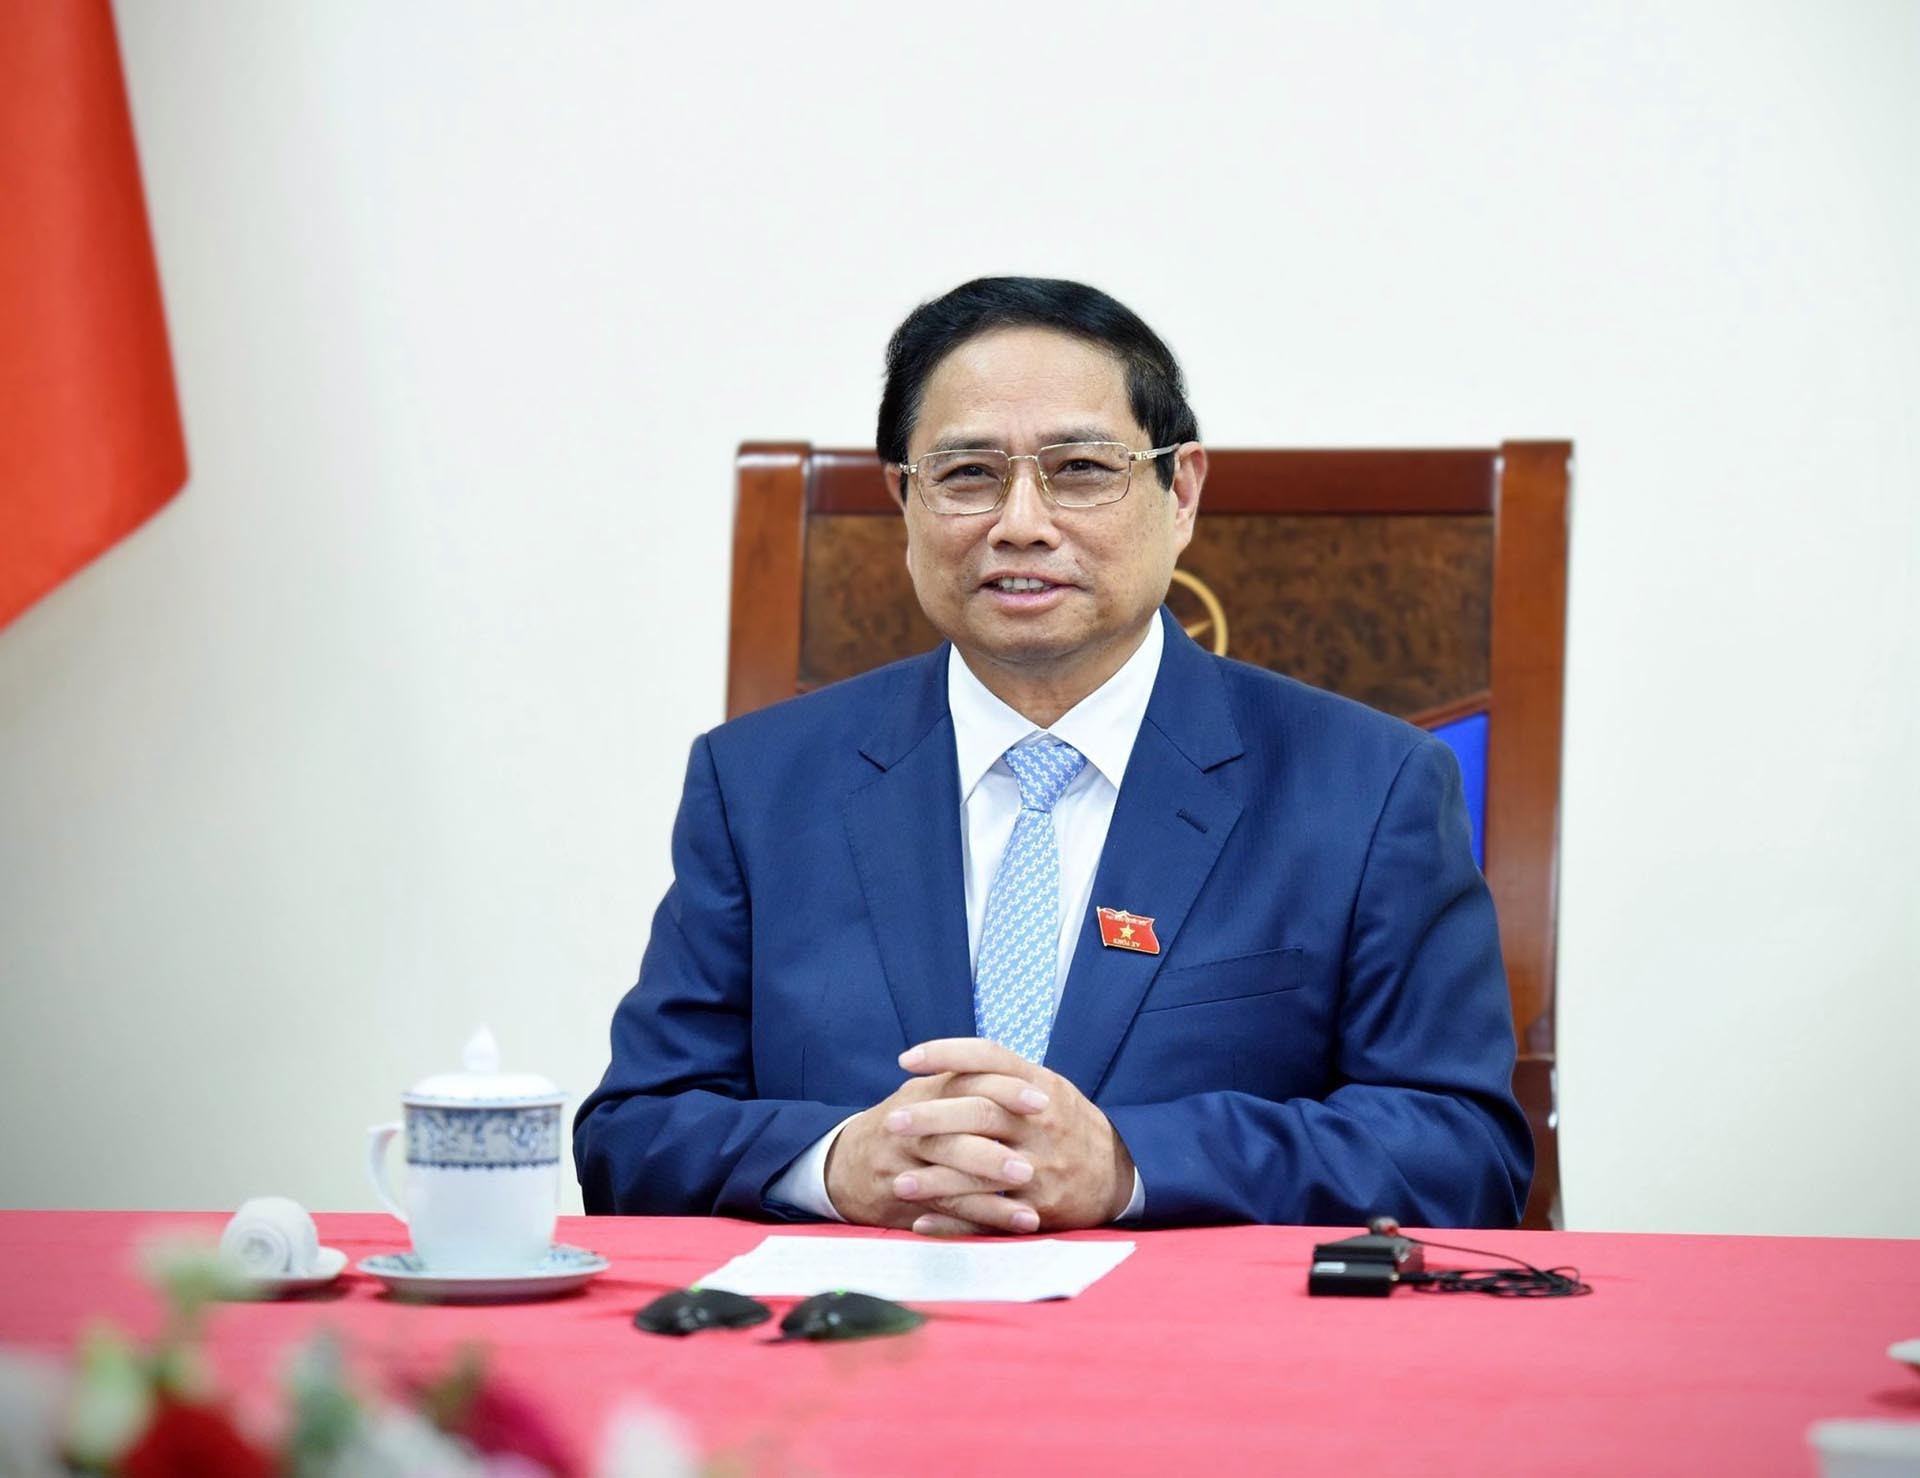 Prime Minister Pham Minh Chinh to pay official visit to Republic of Korea